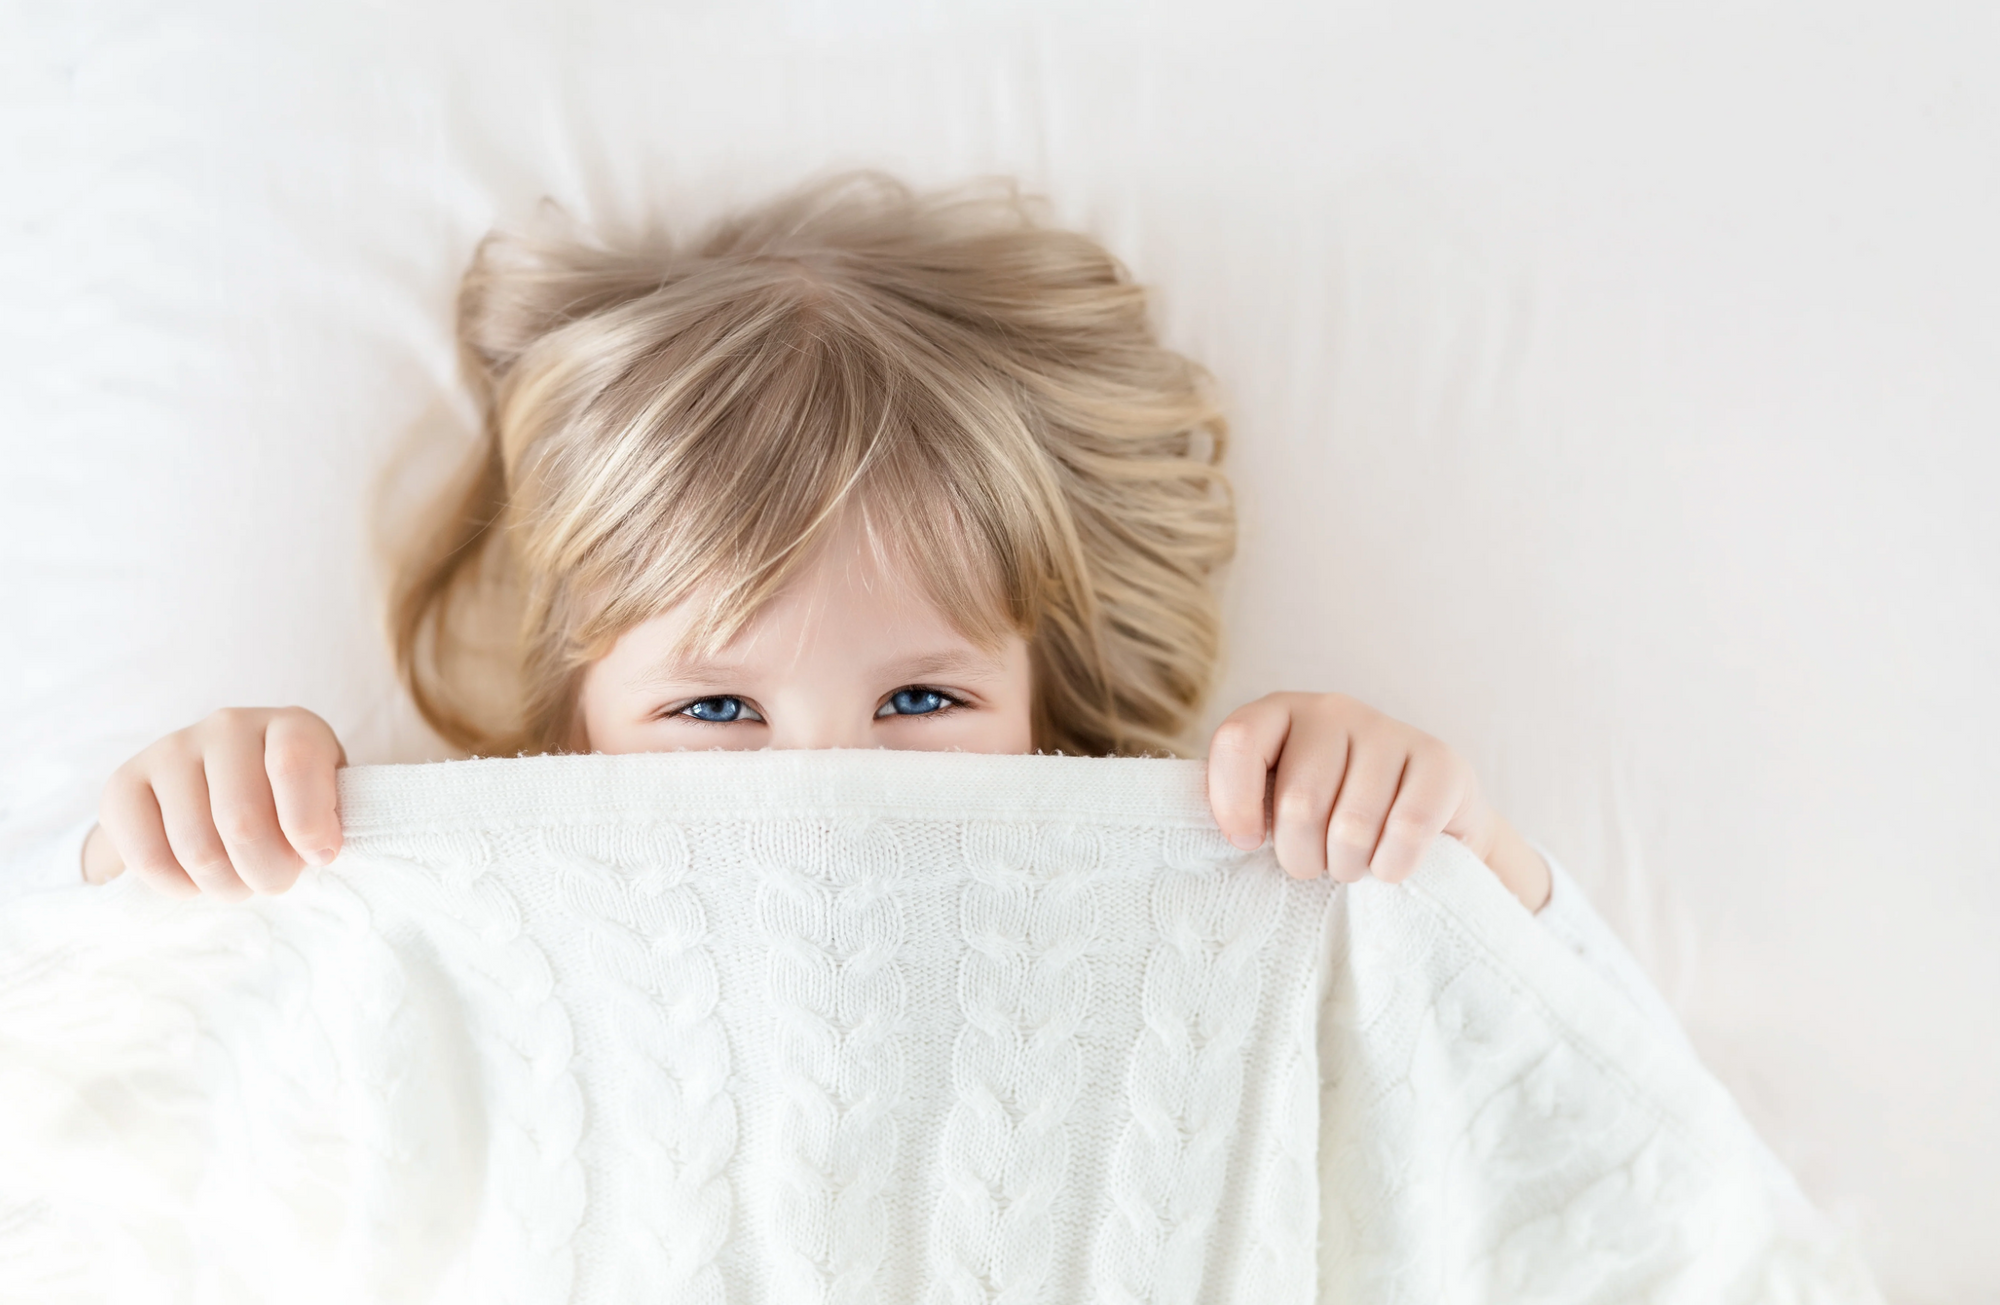 When Can a Toddler Sleep with a Blanket?